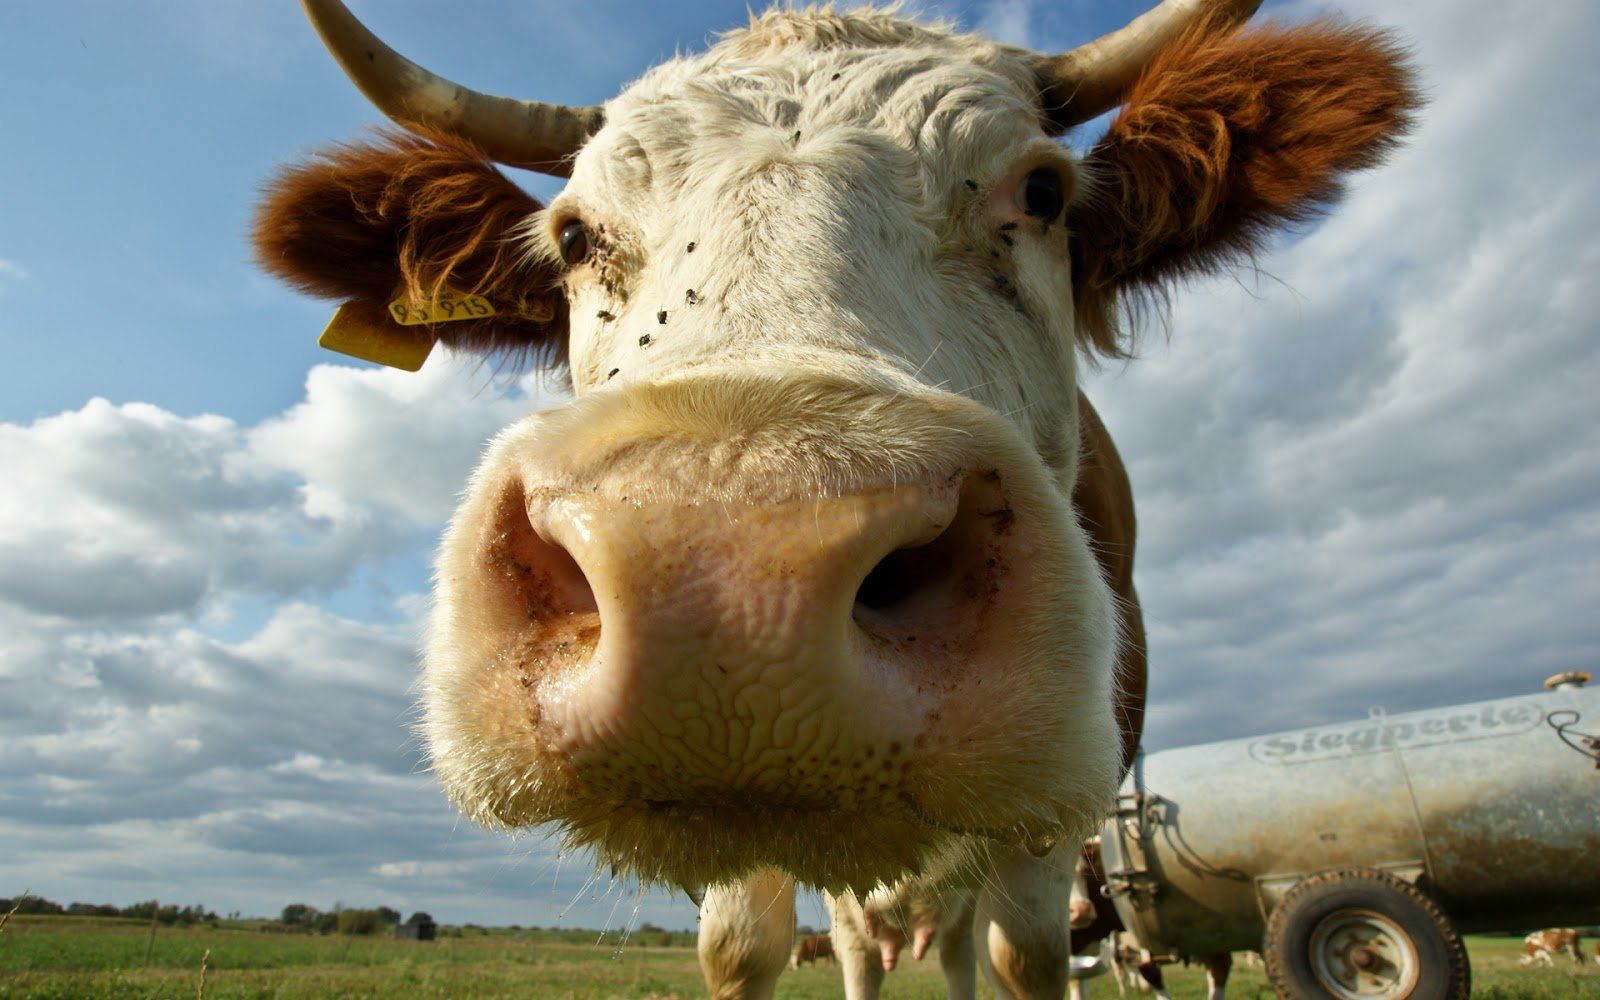 A cow is looking at the camera - Cow